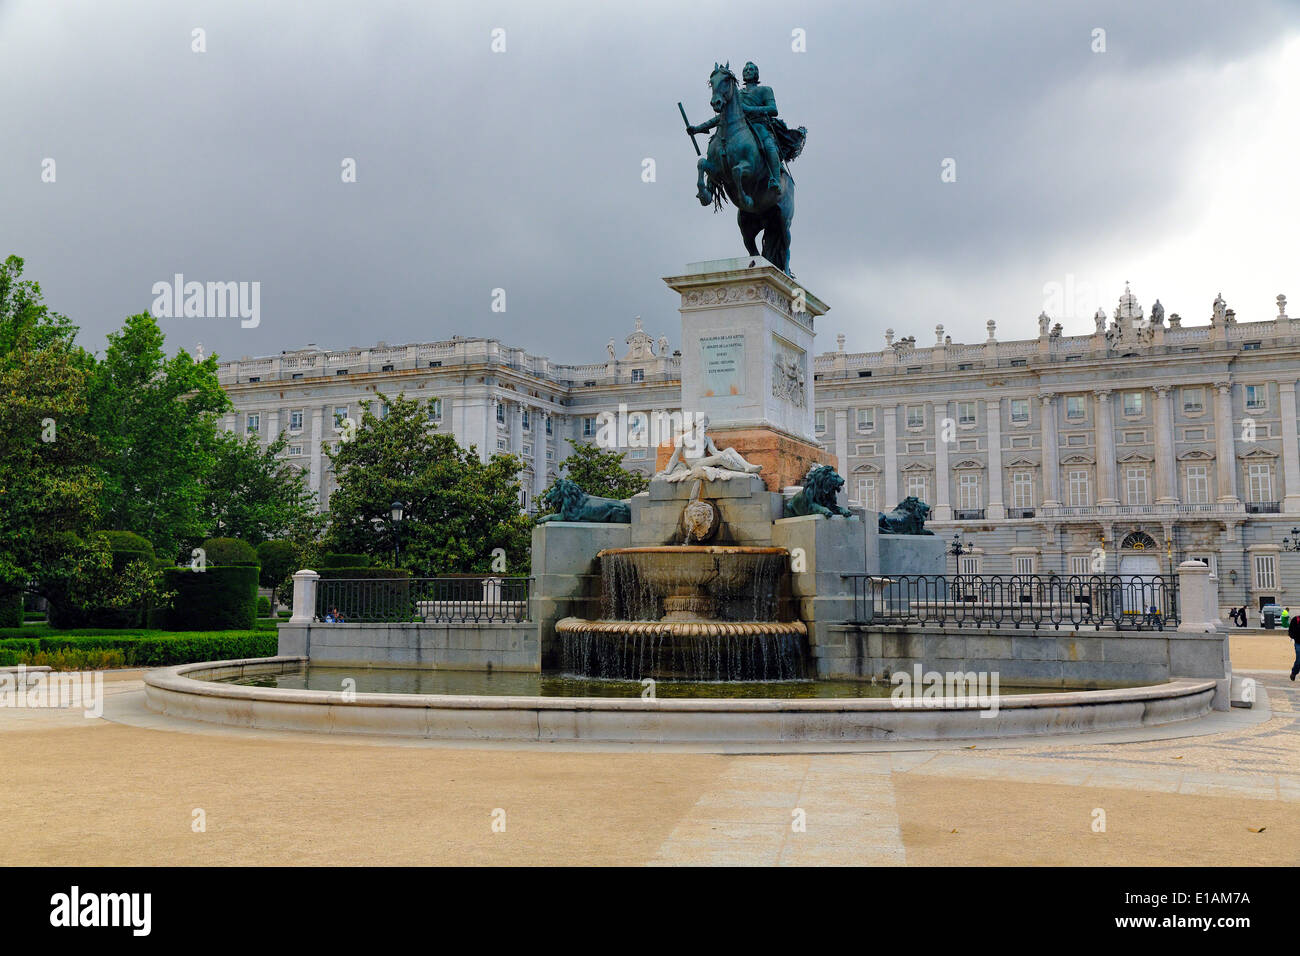 Low Angle View of the Equestrian Statue of King Philip IV, Plaza de Oriente, Madrid, Spain Stock Photo